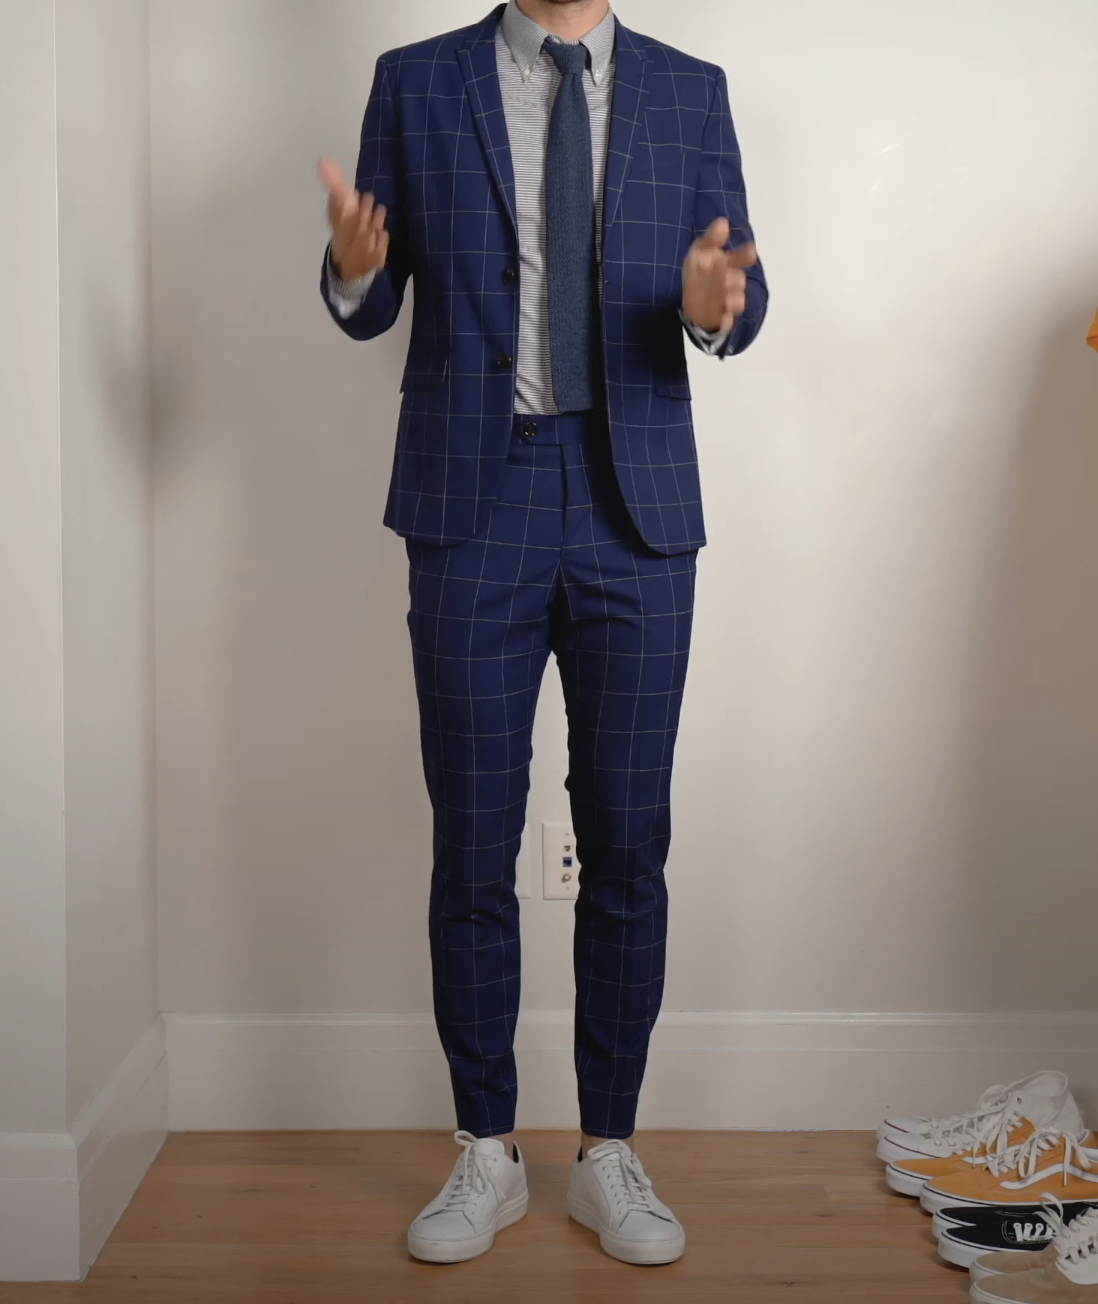 A person wearing a suit and tie with sneakers, no socks